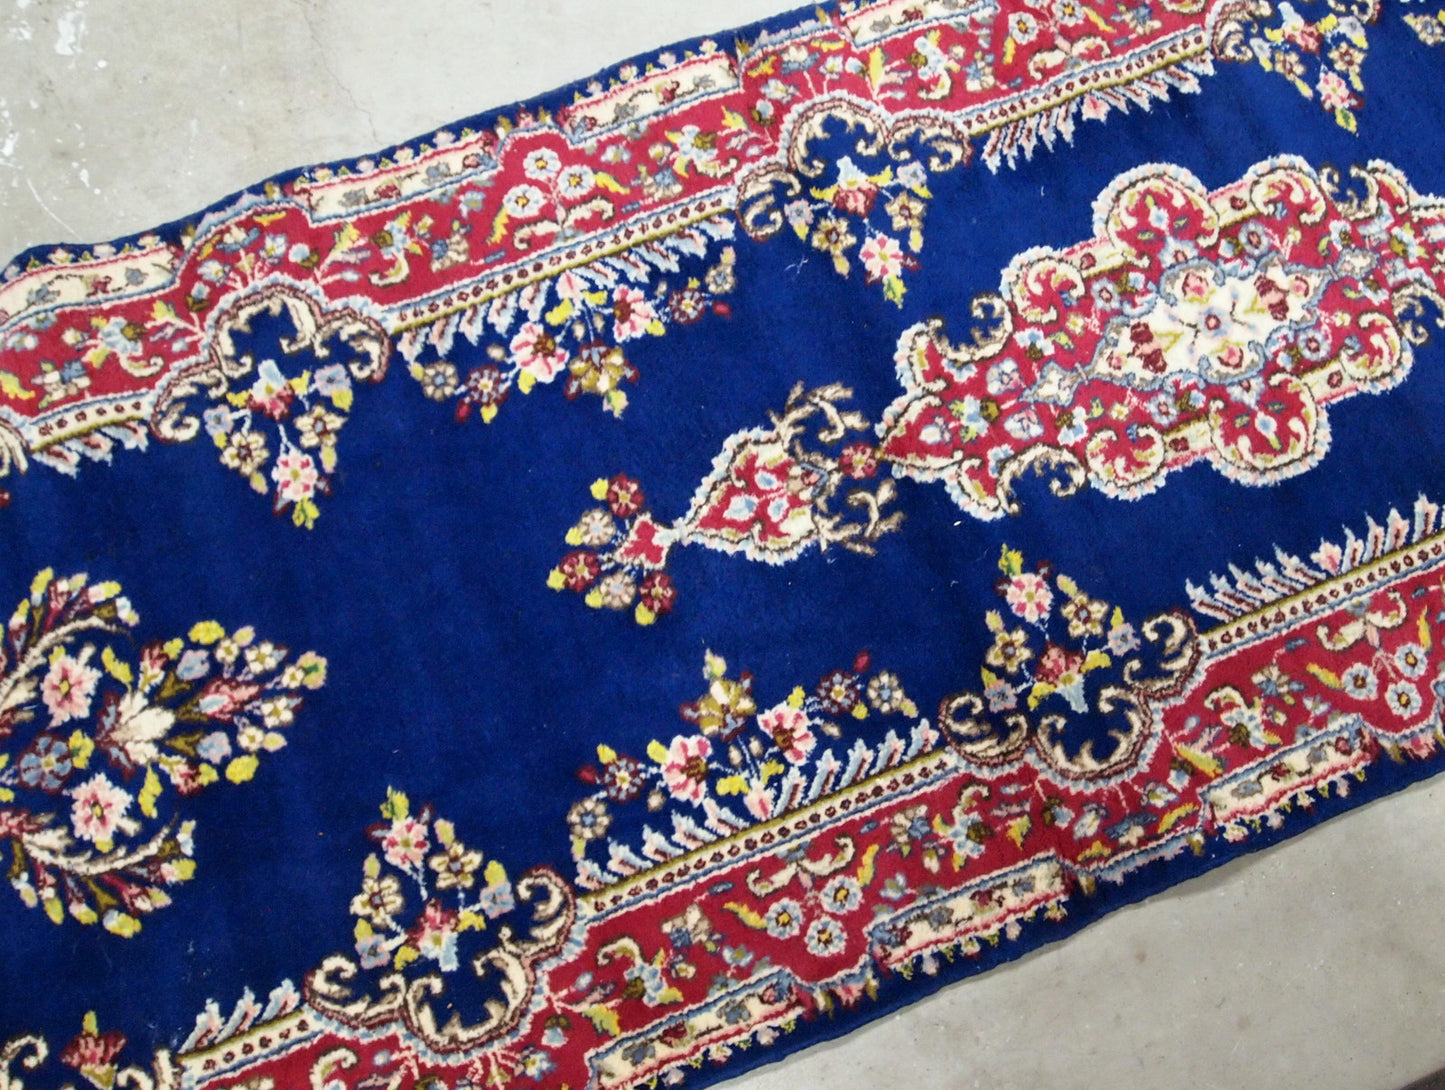 Handmade antique Persian Kerman runner in bright blue and red wool. The runner is from the middle of 20th century in original good condition.